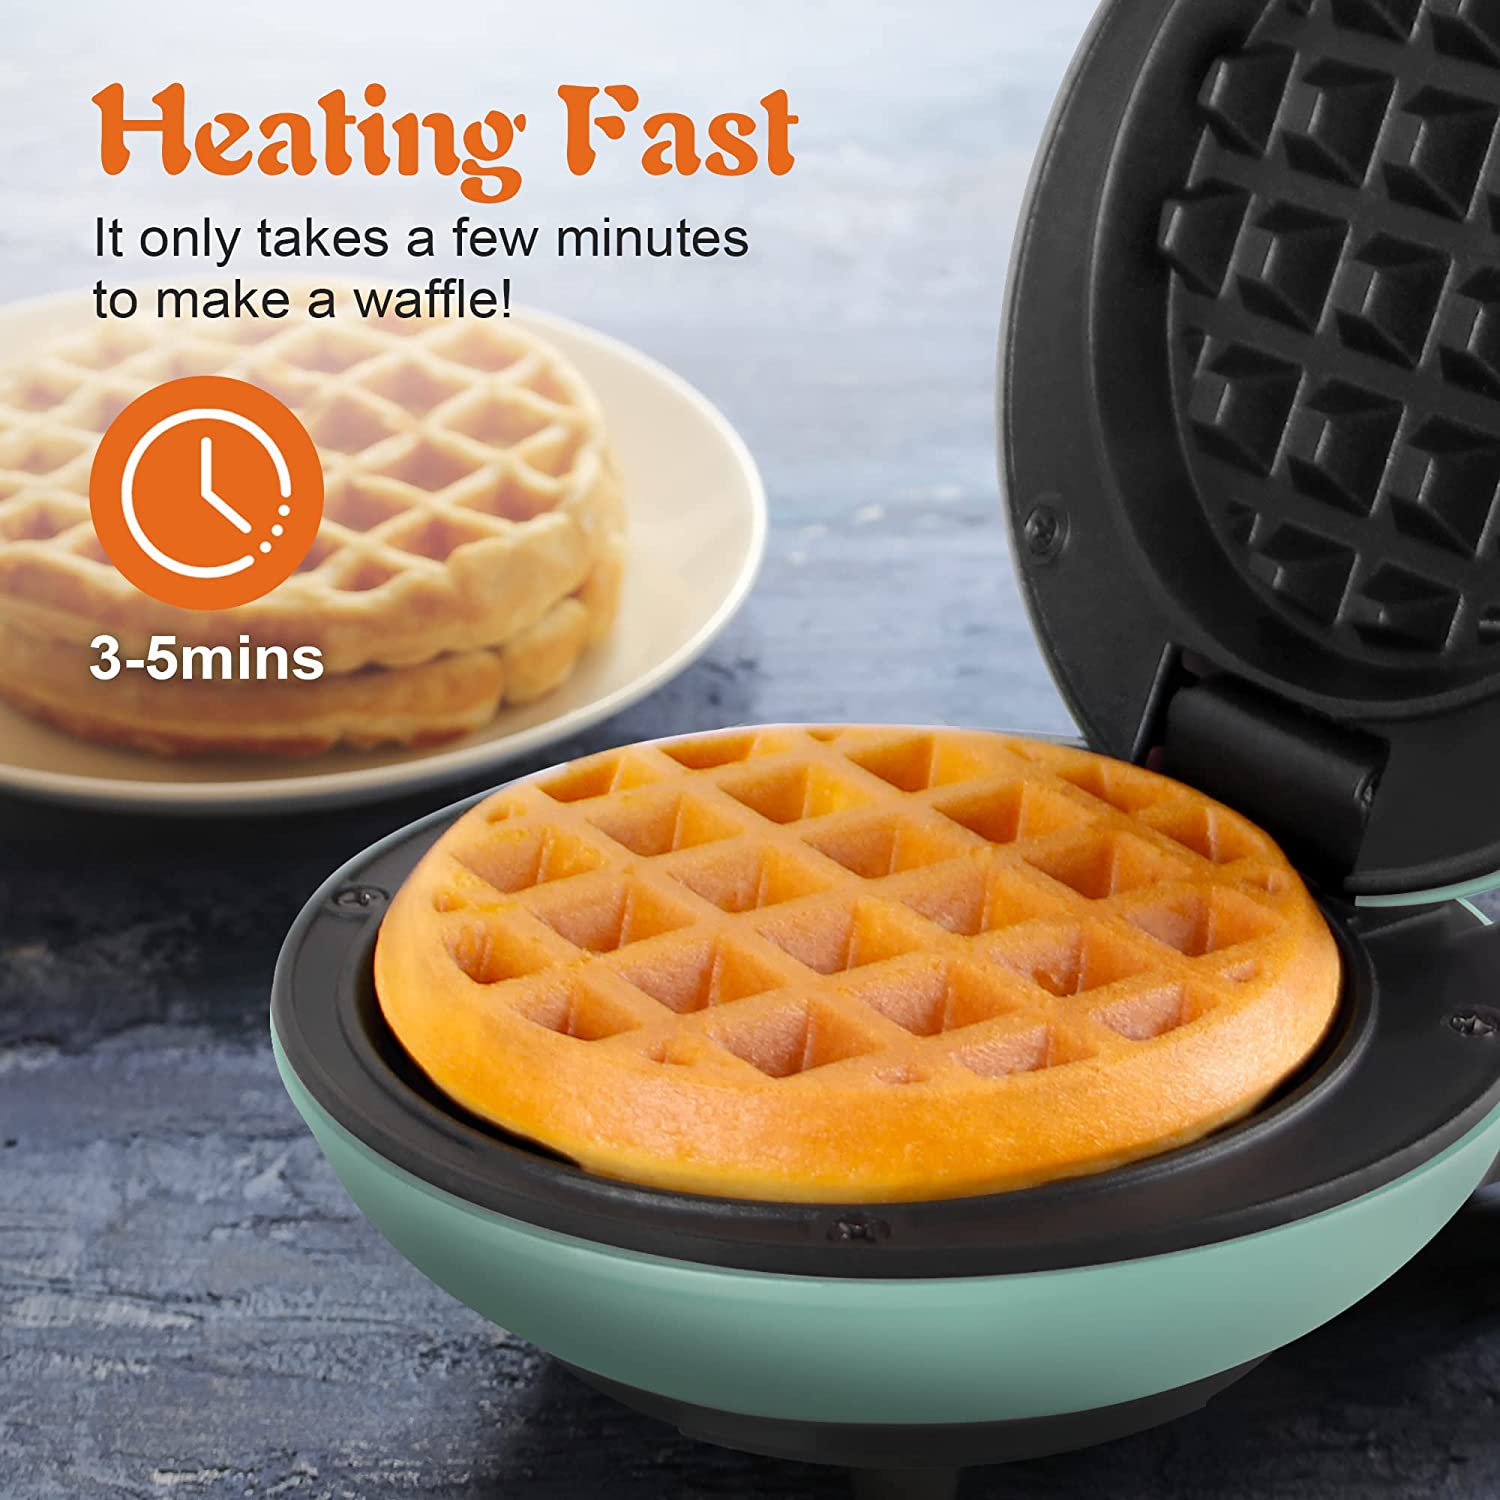 Crownful Mini Waffle Maker Machine, 4 Inches Portable Small Compact Design, Easy to Clean, Non-Stick Surface, Recipe Guide Included, Perfect for